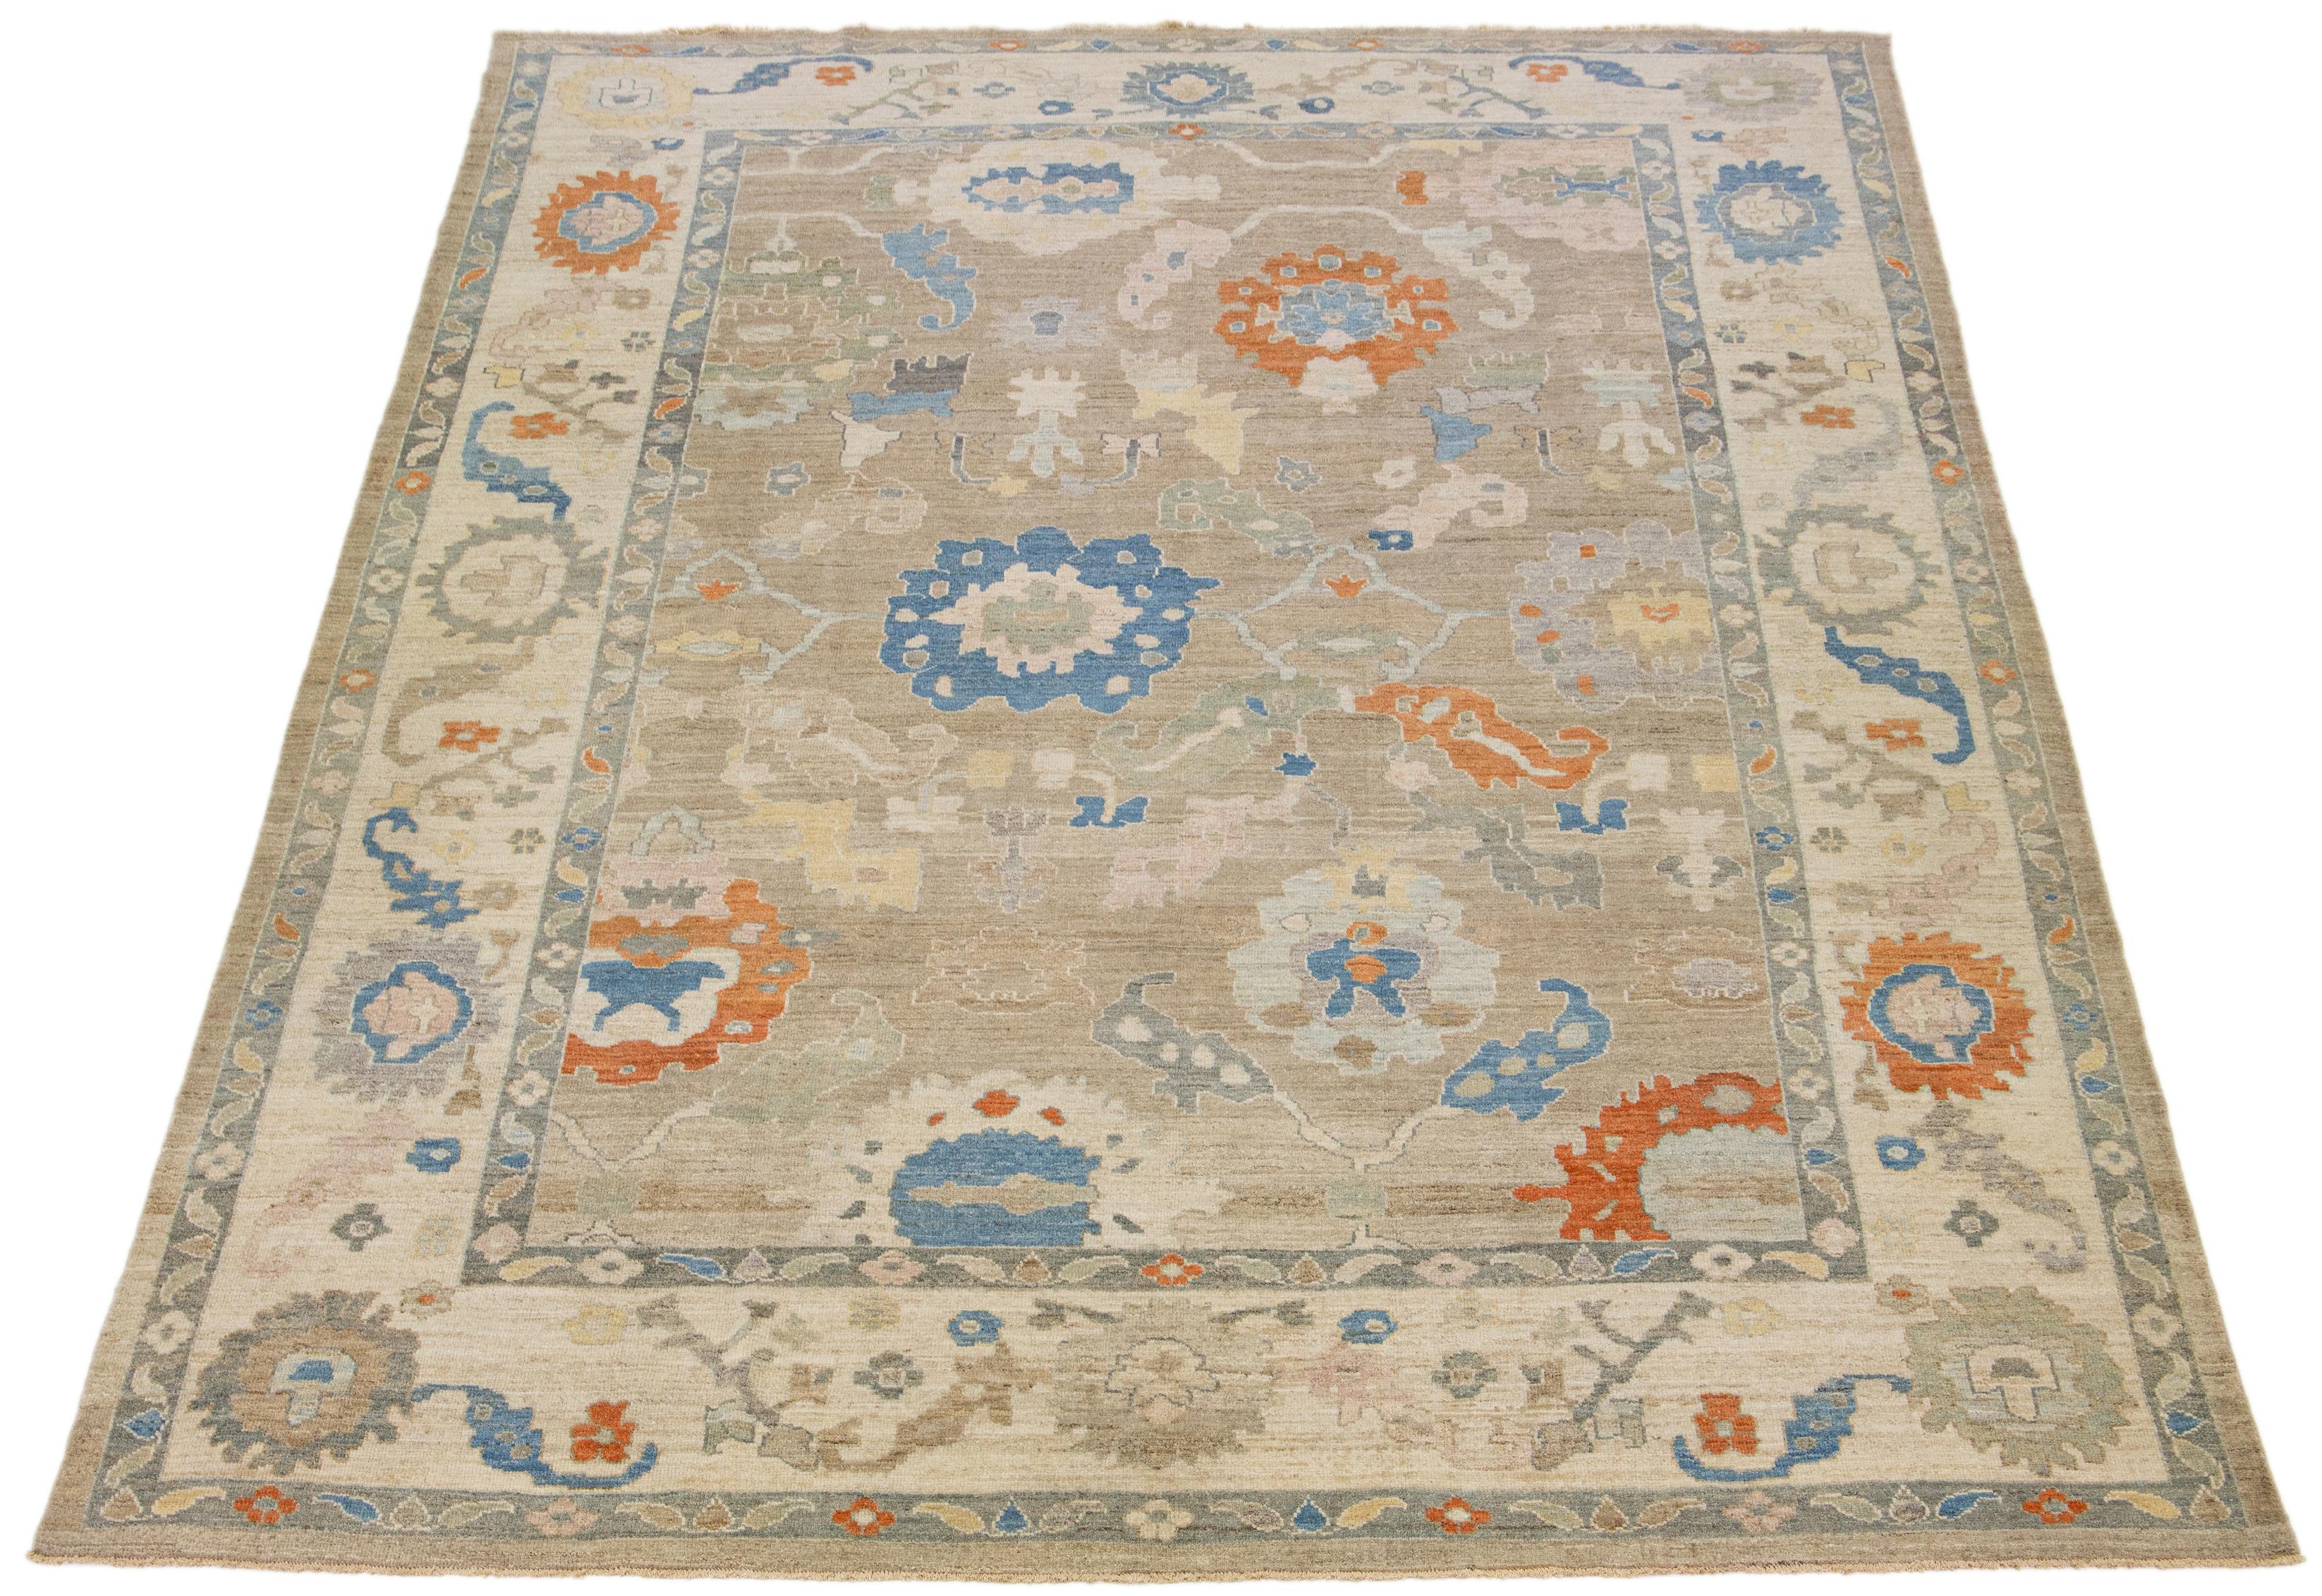 This modern reinterpretation of timeless Sultanabad design is beautifully manifested in an exquisitely hand knotted wool rug, resplendent in its striking light brown shade. An intricate border delineates its all-over floral embroidery, embellished